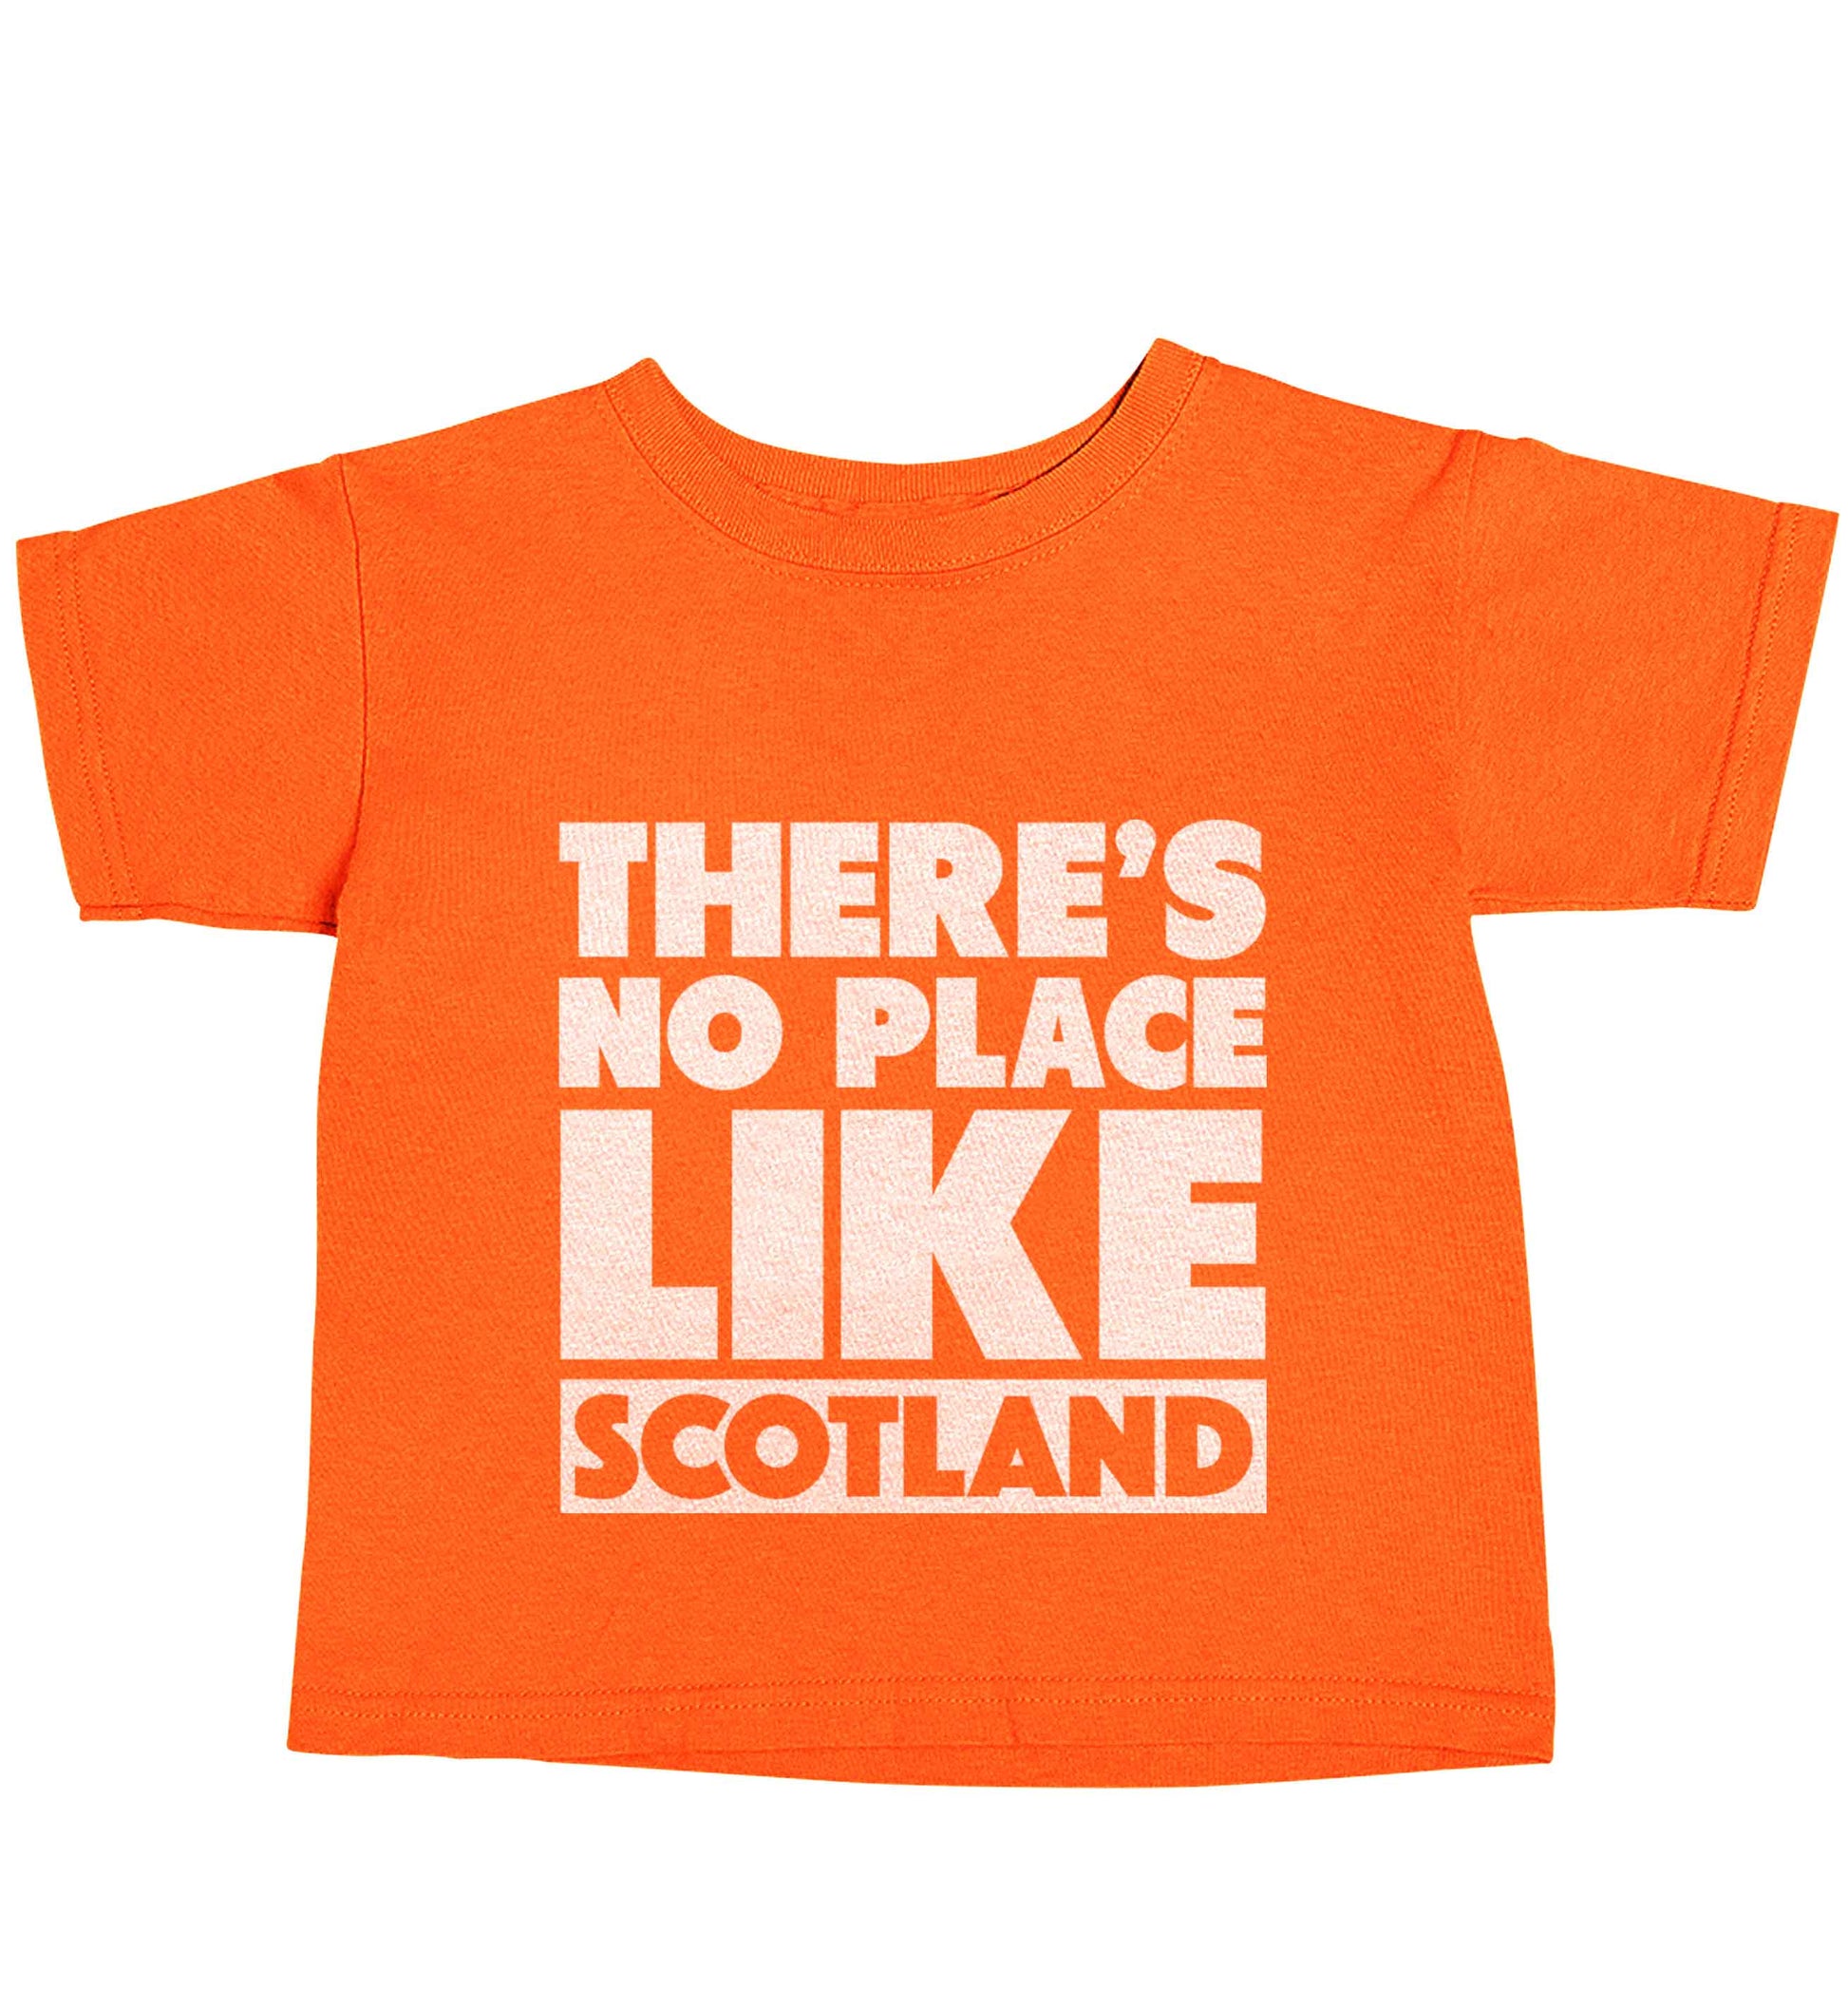 There's no place like Scotland orange baby toddler Tshirt 2 Years